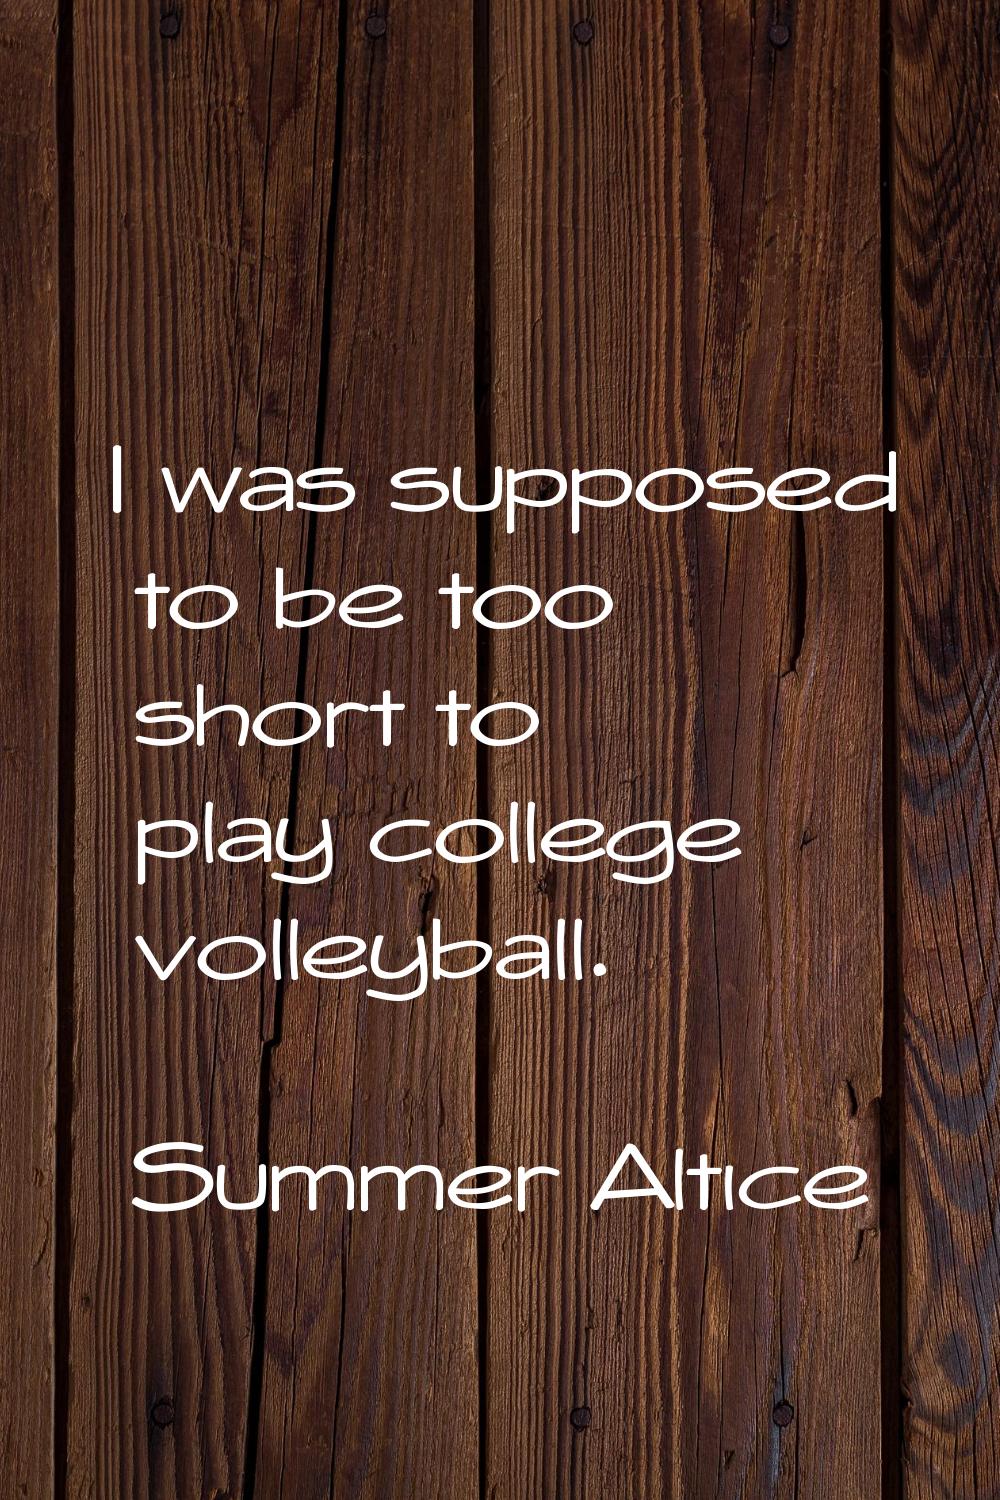 I was supposed to be too short to play college volleyball.